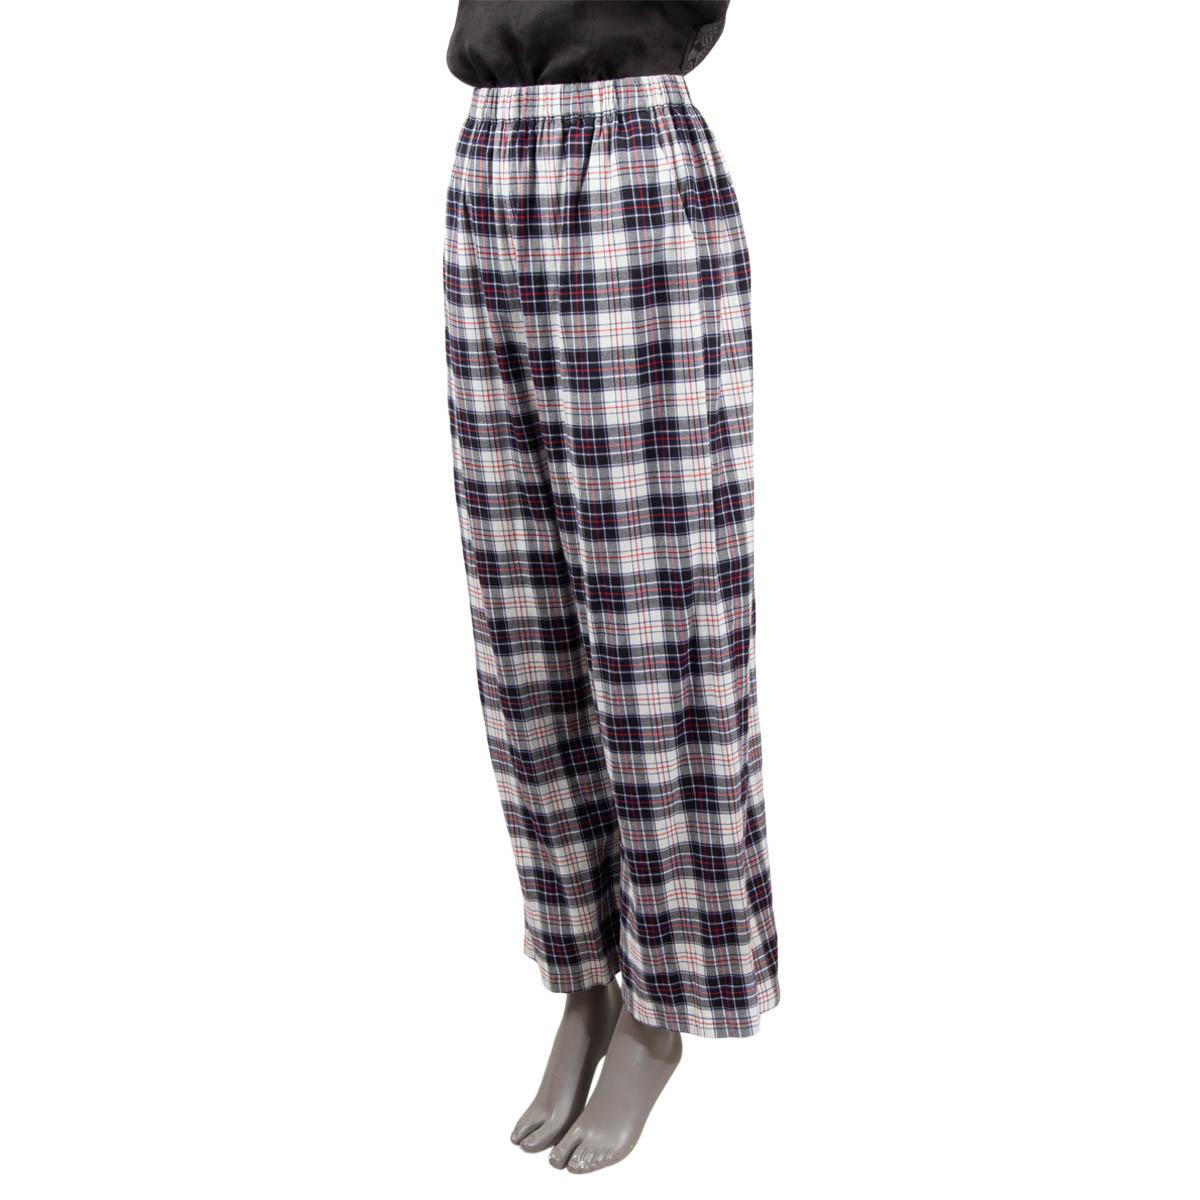 100% authentic Balenciaga plaid pants in black, white, red and blue cotton (100%). Features an elastic waistband, straight-leg and pocket in the back with logo. Have been worn and are in excellent condition.

2018 Pre-Fall

Measurements
Tag